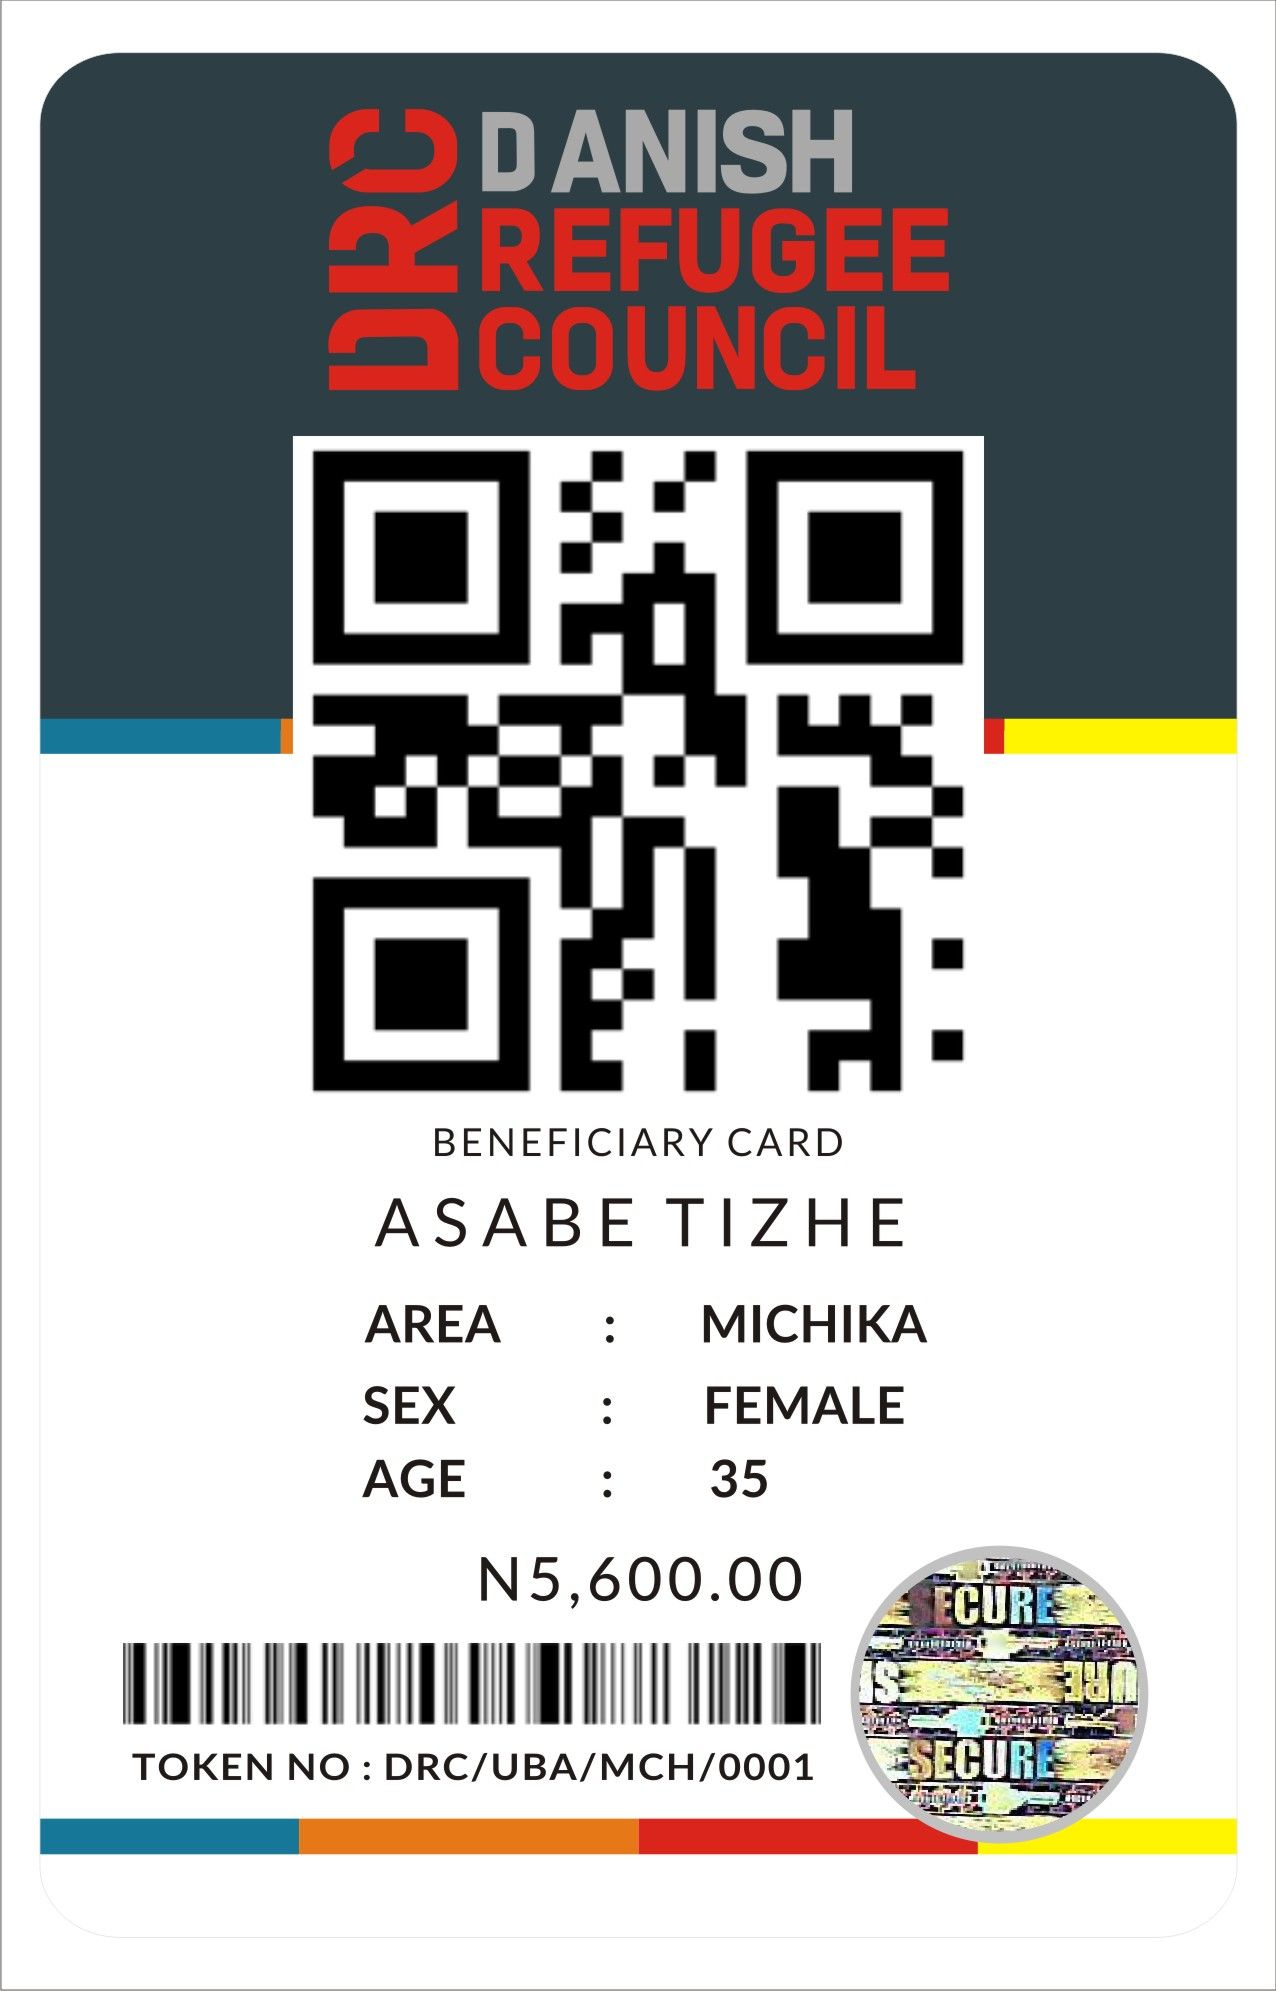 CALL CHINEDU ON 08179651585 TO PRINT AUTHENTICATION LABELS AND HOLOGRAMS